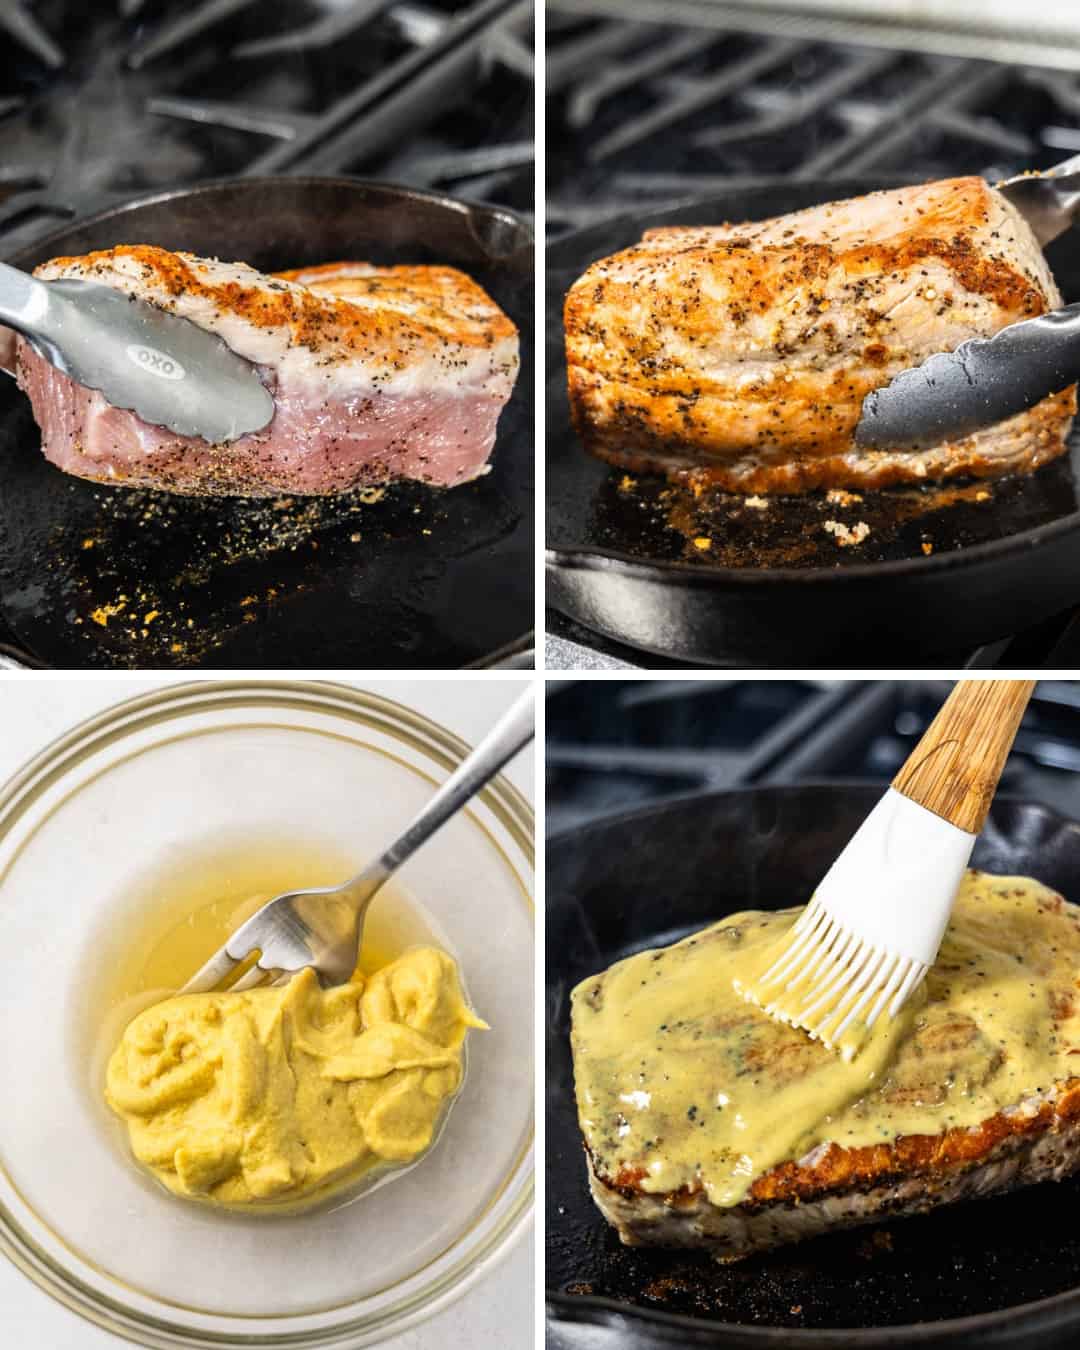 A collage of four images showing a half seared pork loin, a fully seared pork loin, mixing of a glaze in a bowl, and then brushing the glaze onto the seared pork loin.